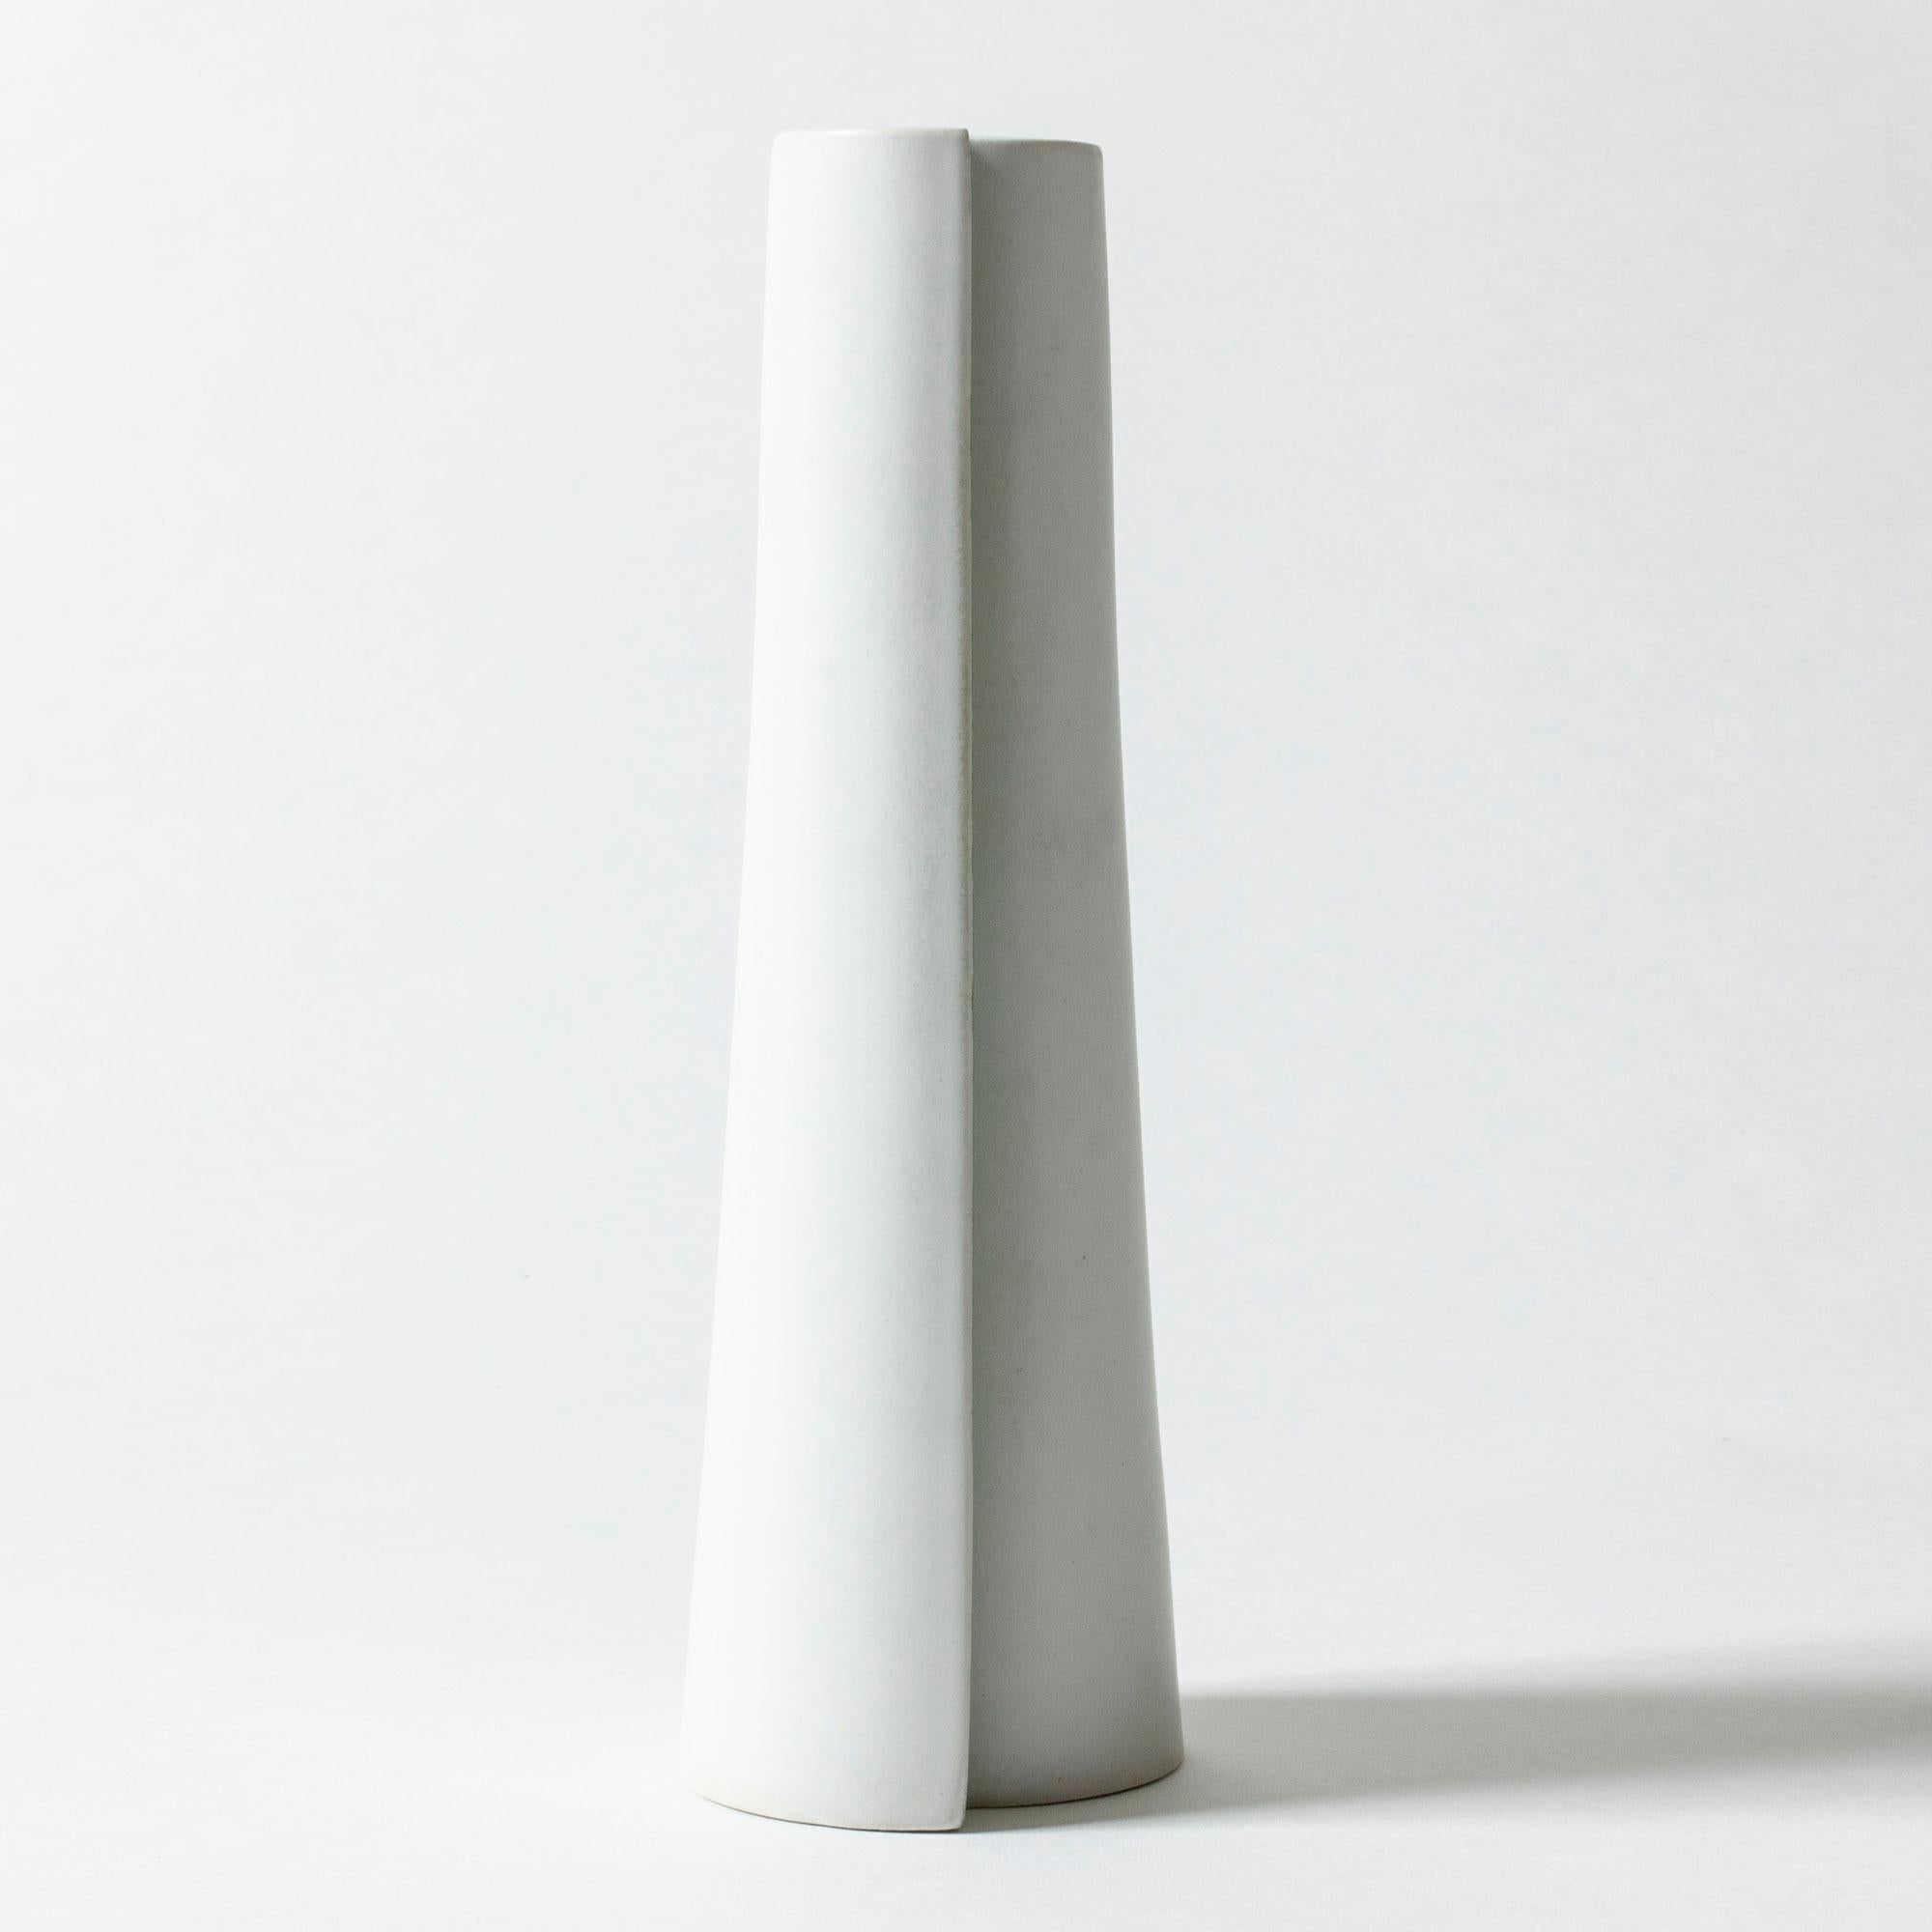 Unique Carrara stoneware “Surrea” vase by Wilhelm Kåge, in a sleek design. The skewed form is made from two sections, that create an expressive shadow play. Painted light green on both sides.